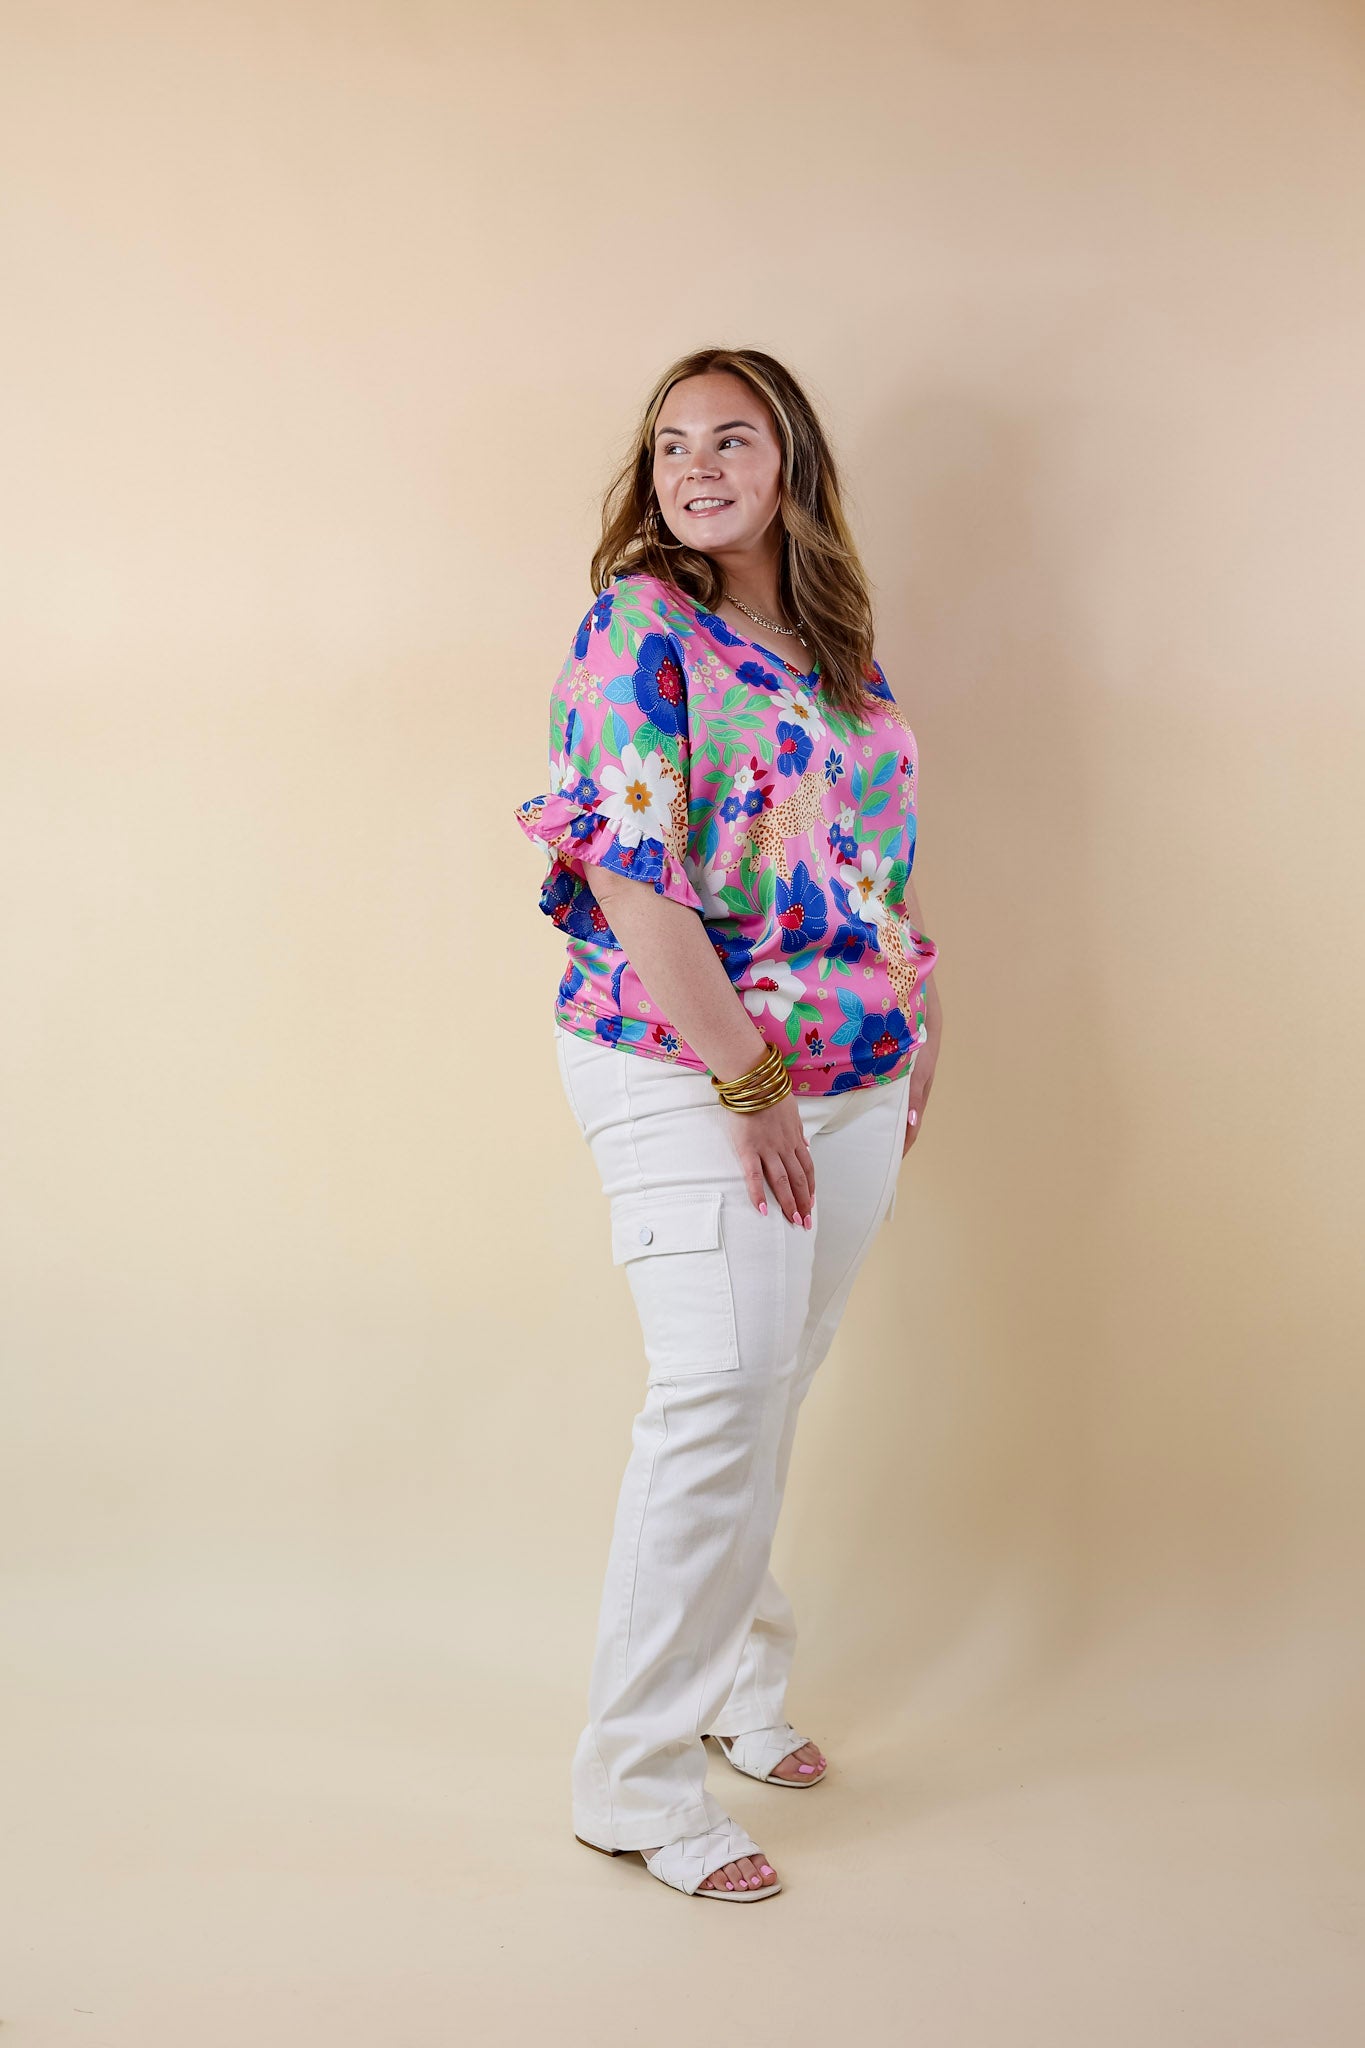 Best Version Floral and Cheetah Print V Neck Top with Ruffle Short Sleeves in Pink - Giddy Up Glamour Boutique